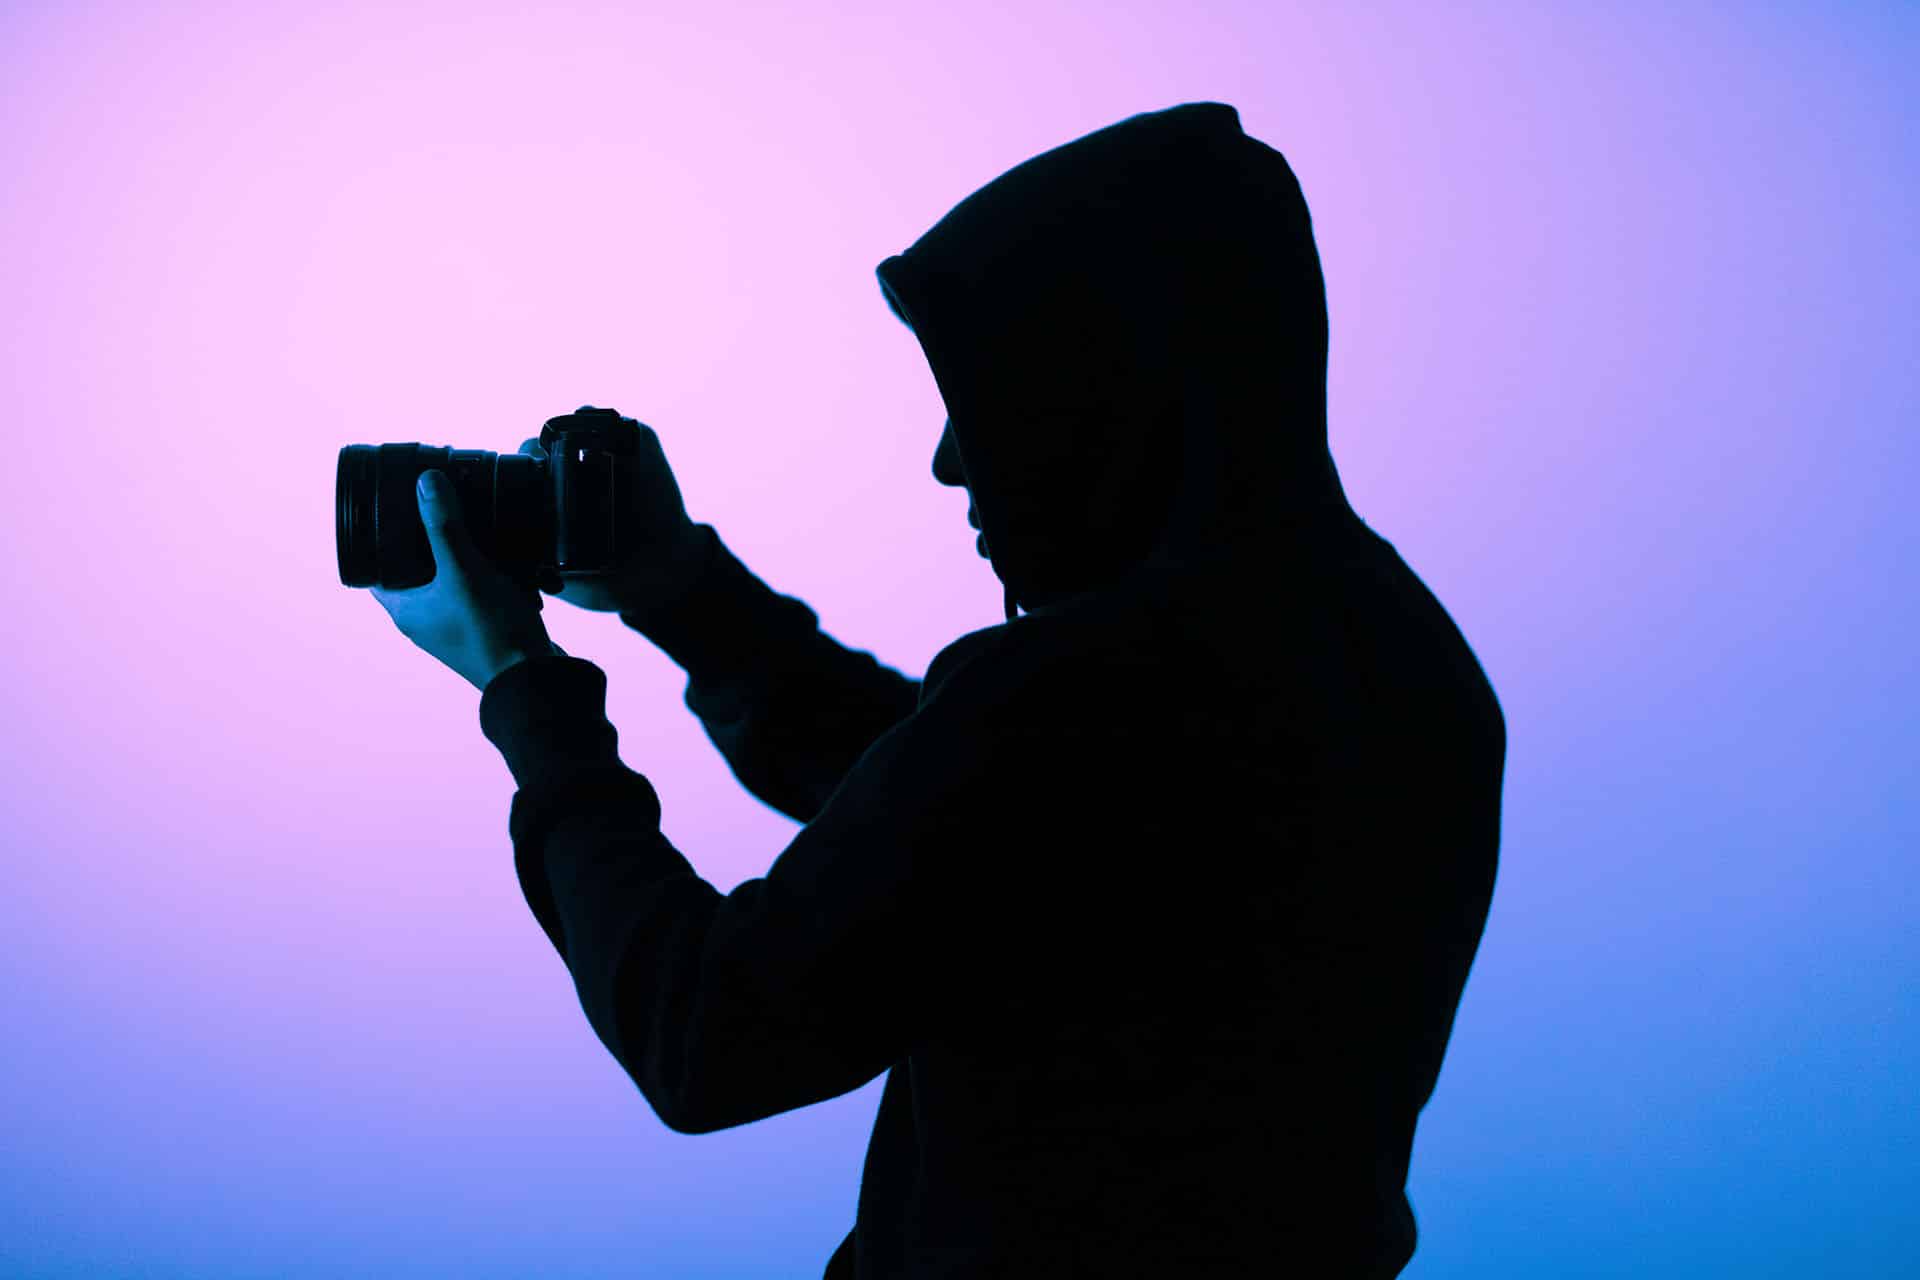 A man holding a camera against a gradient background.